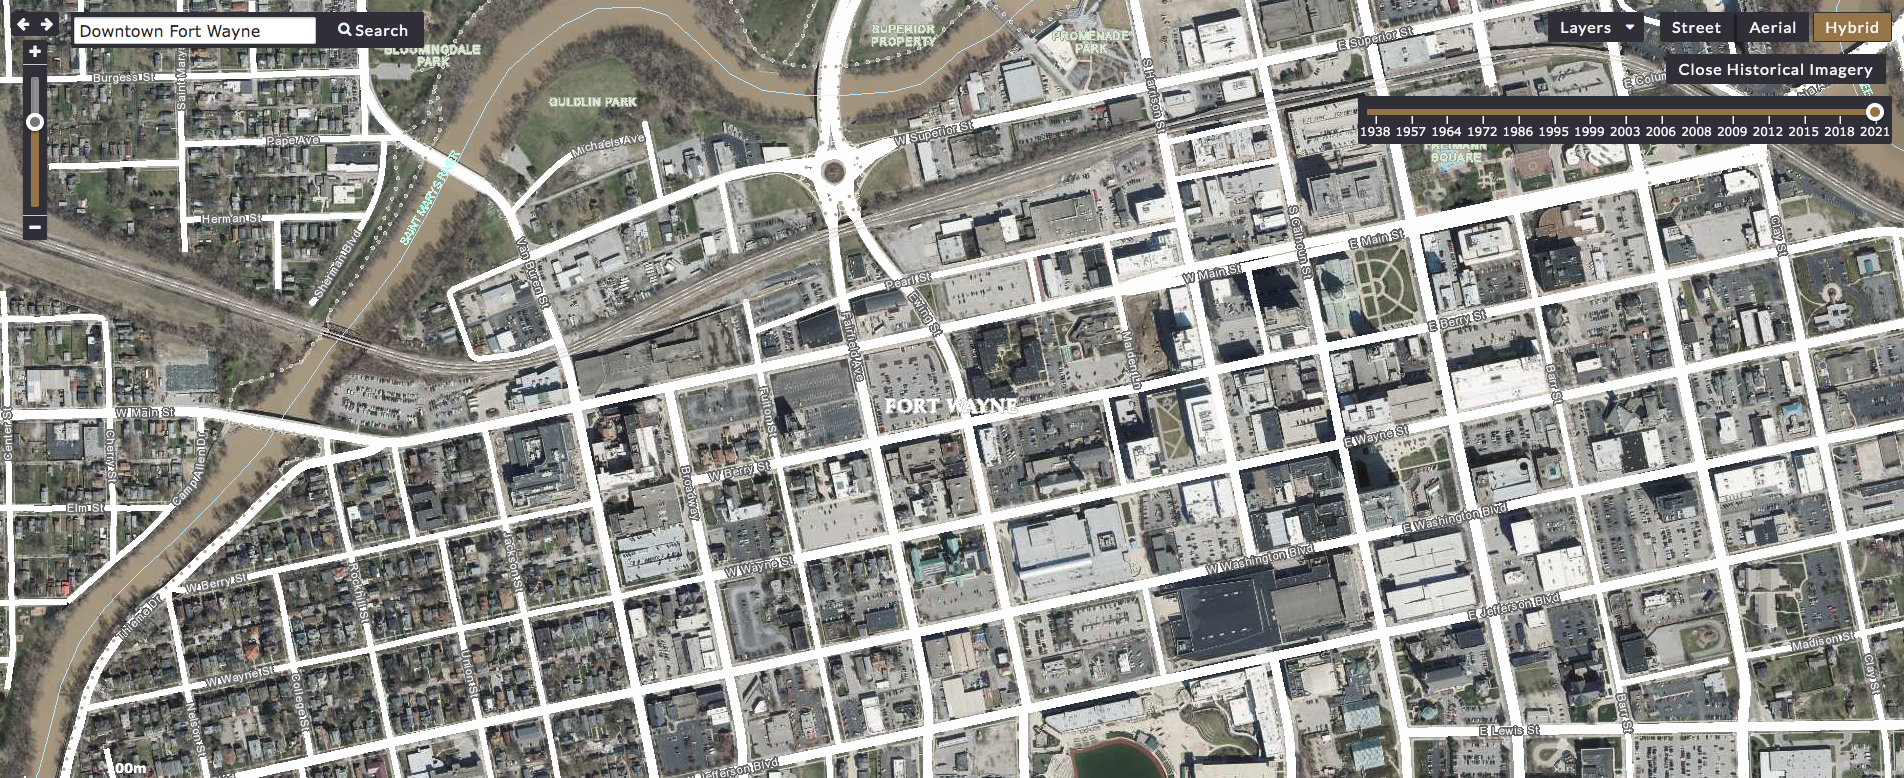 An aerial view of Downtown from 2021 shows the paved, spread out, vehicle-friendly city we have today. 